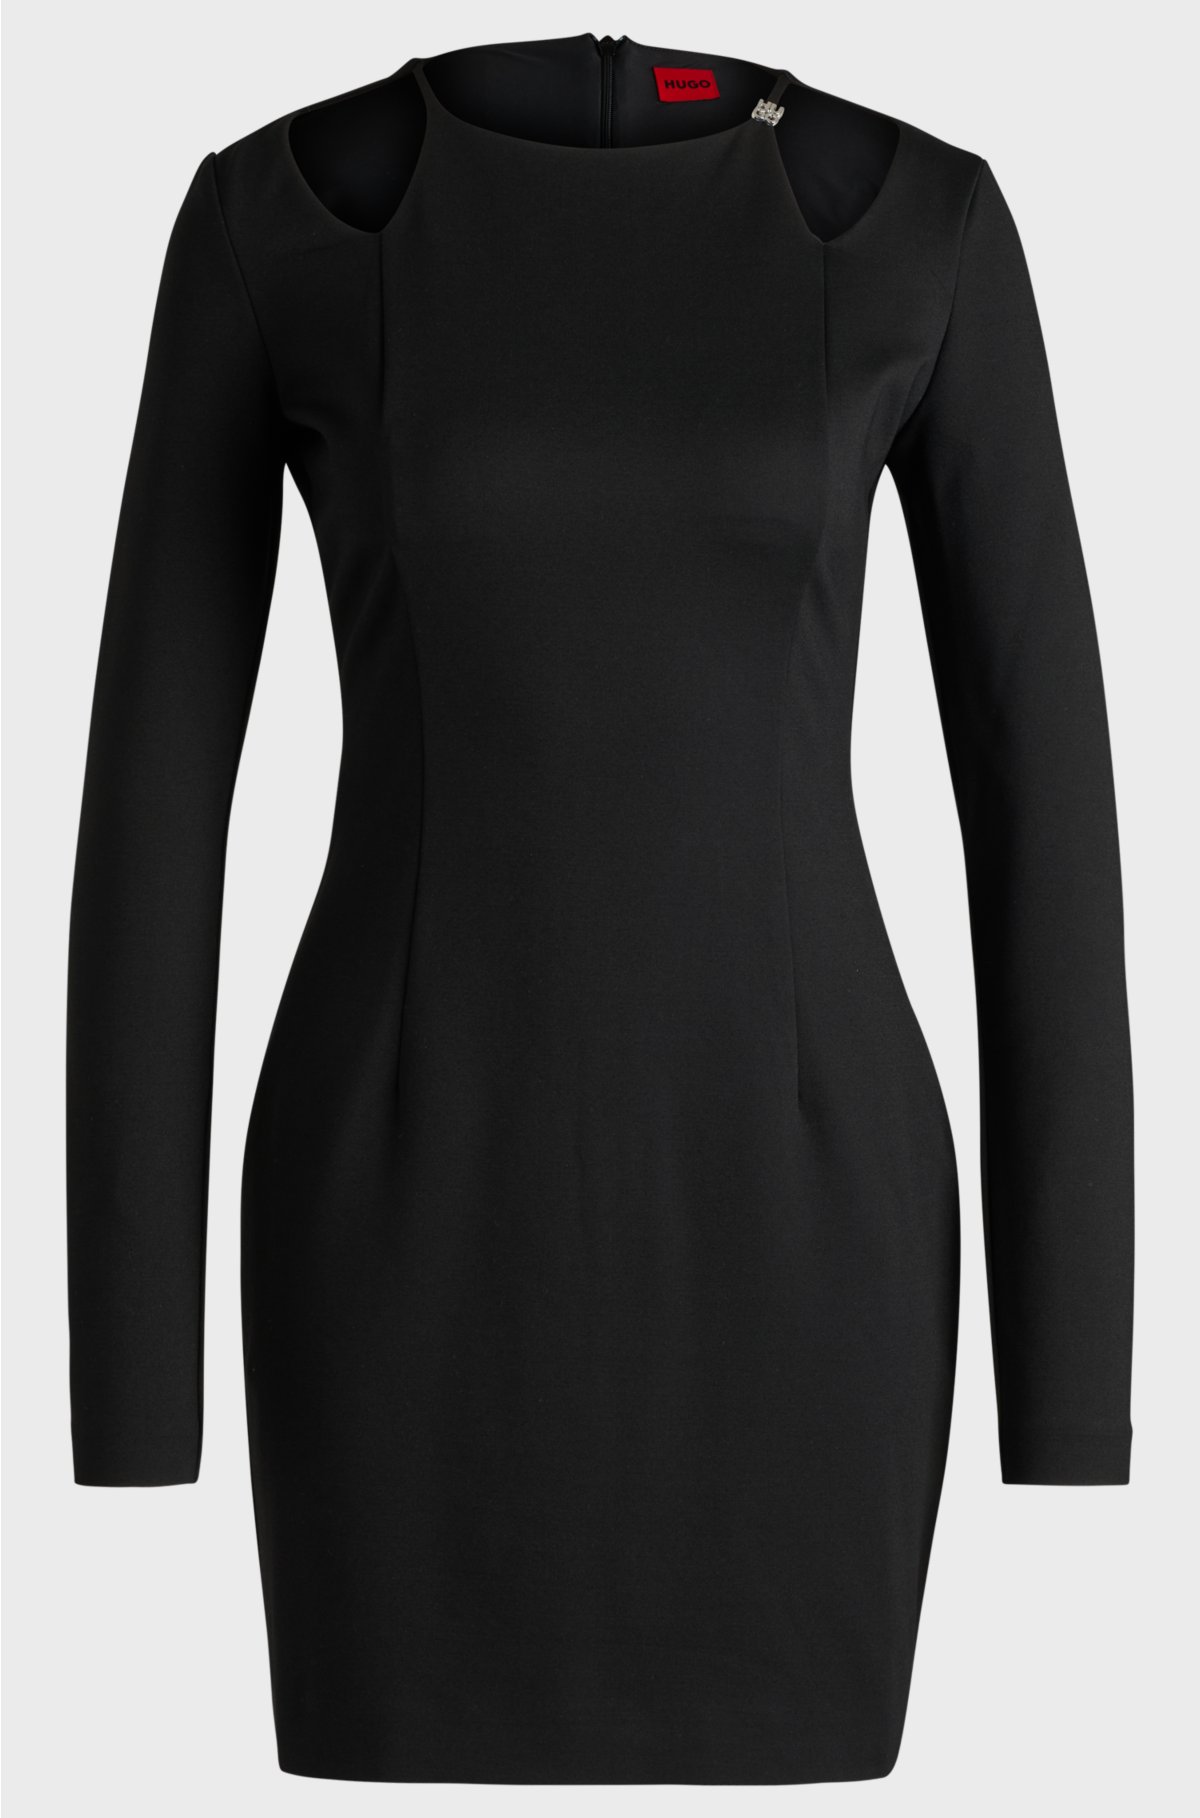 Bodycon mini dress with cut-out details, Black